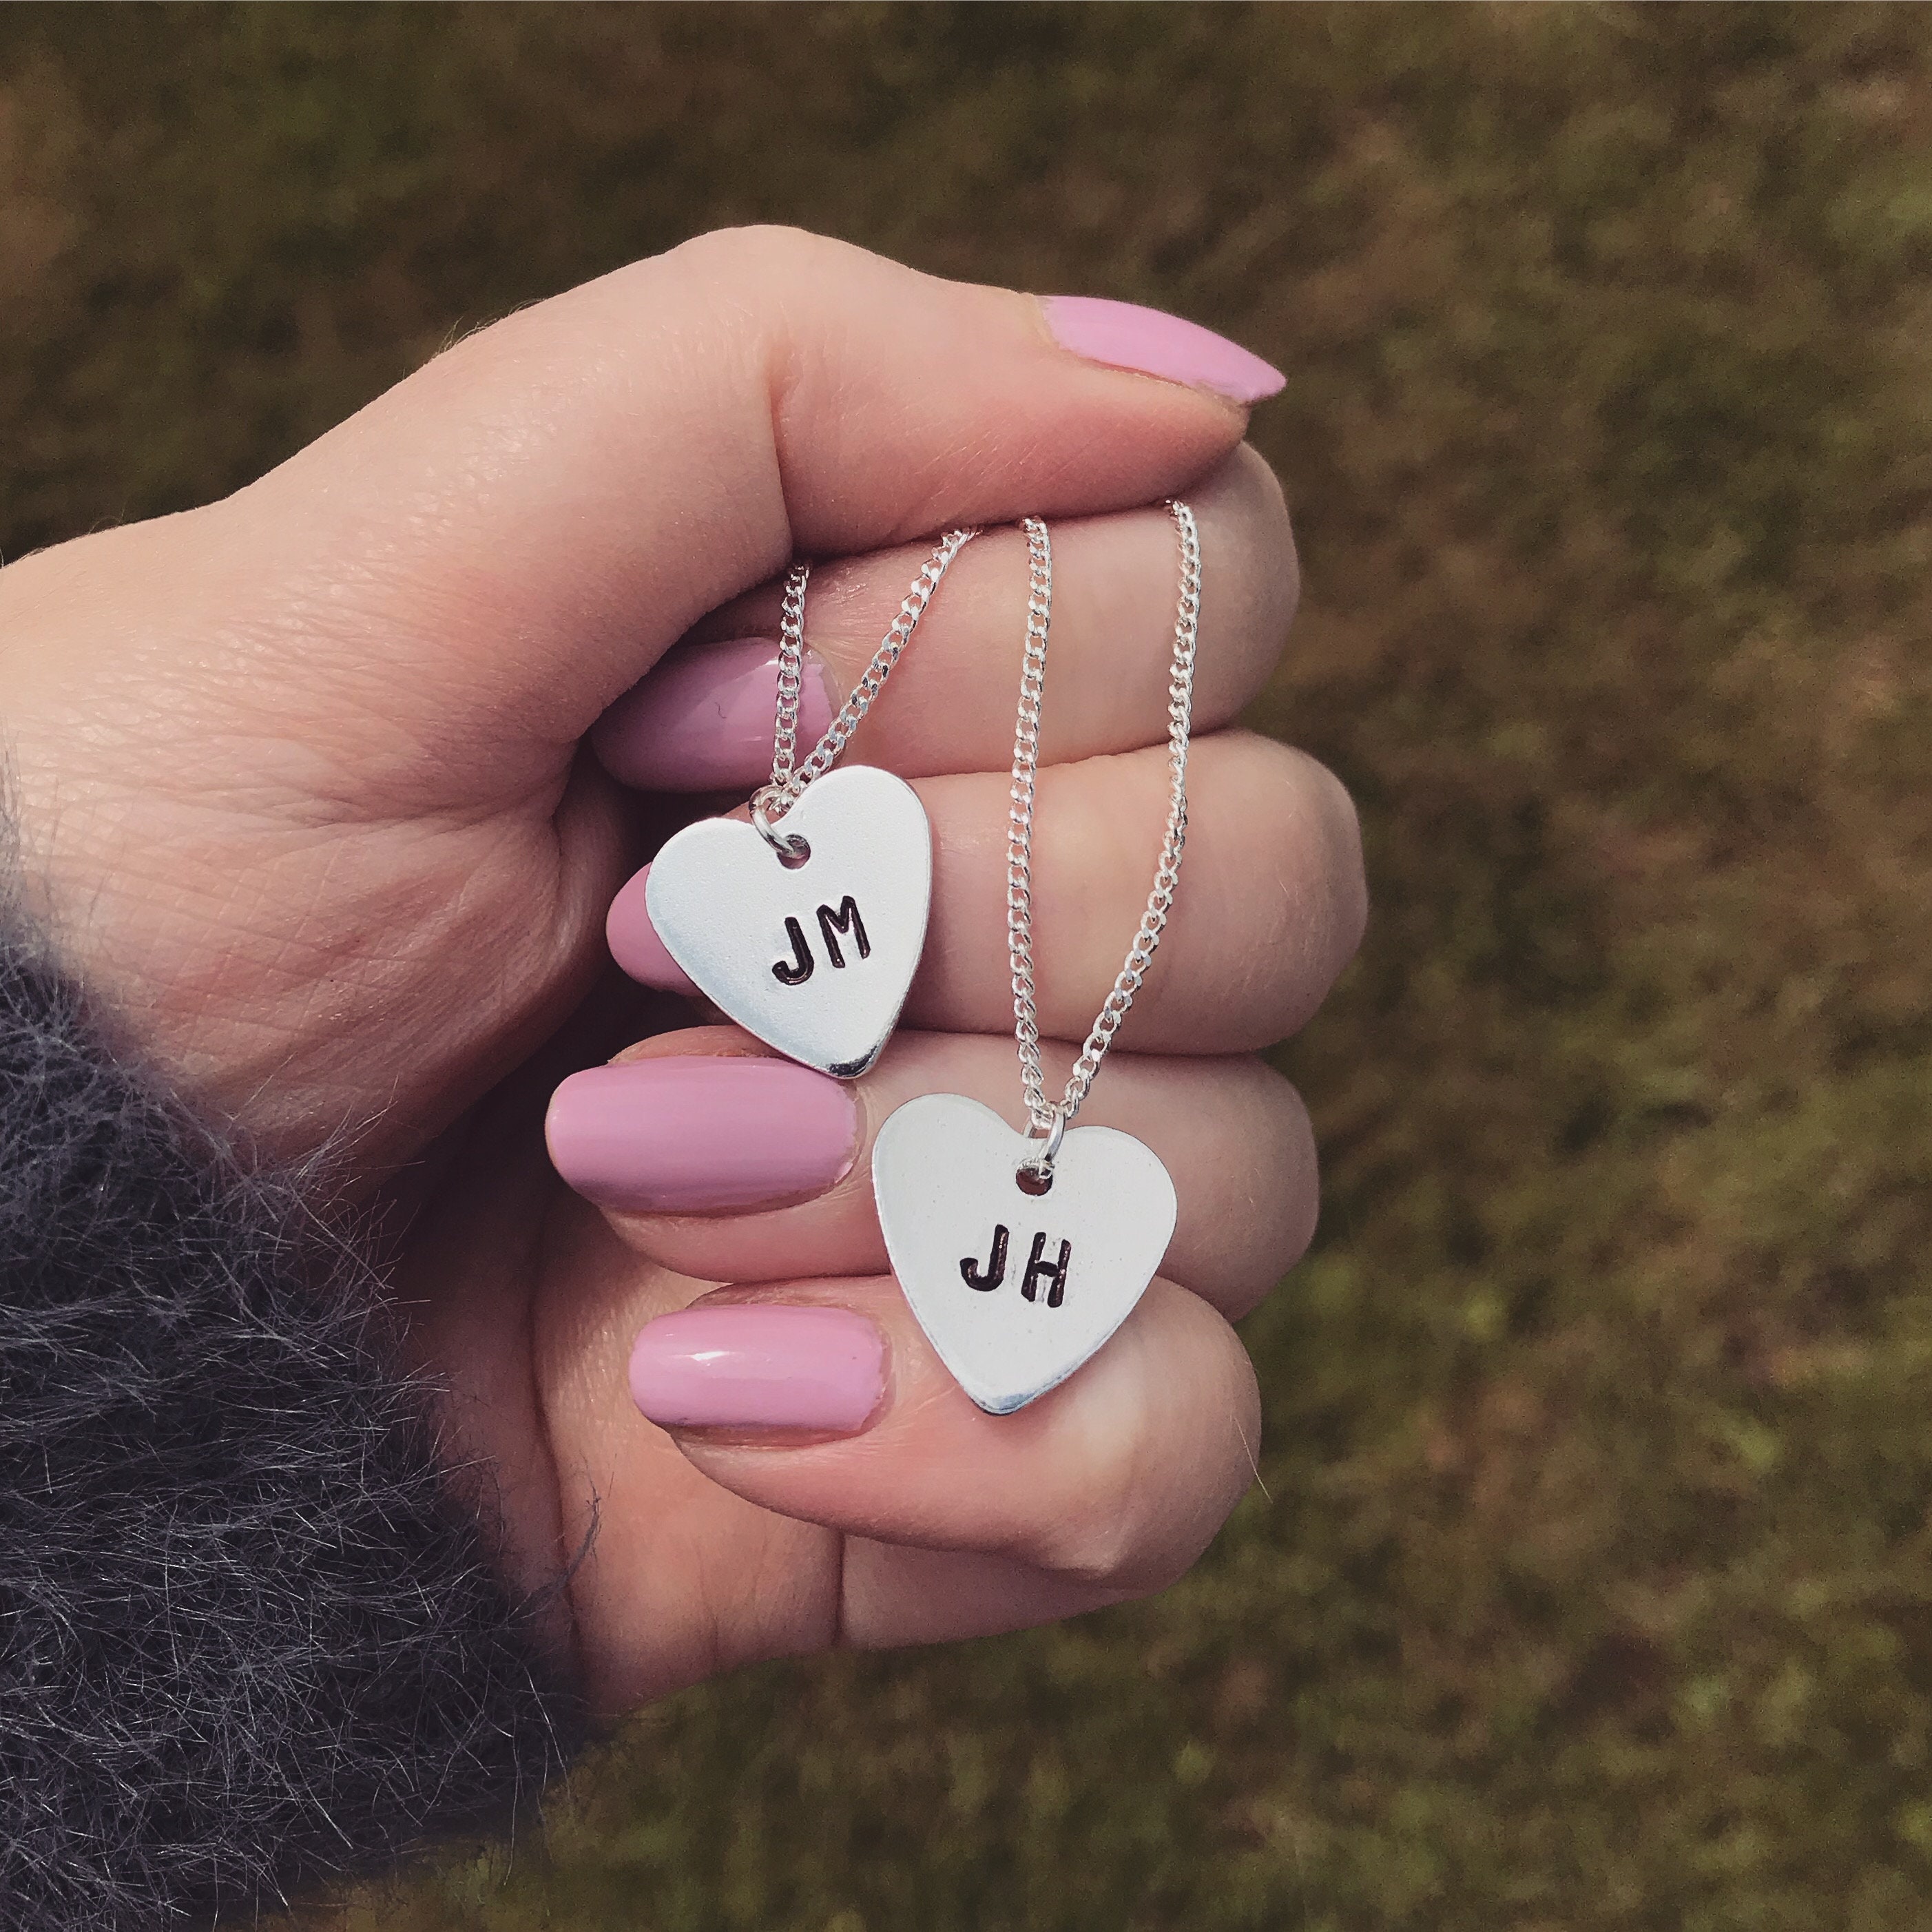 BTS Chain Necklace - Names in Letters